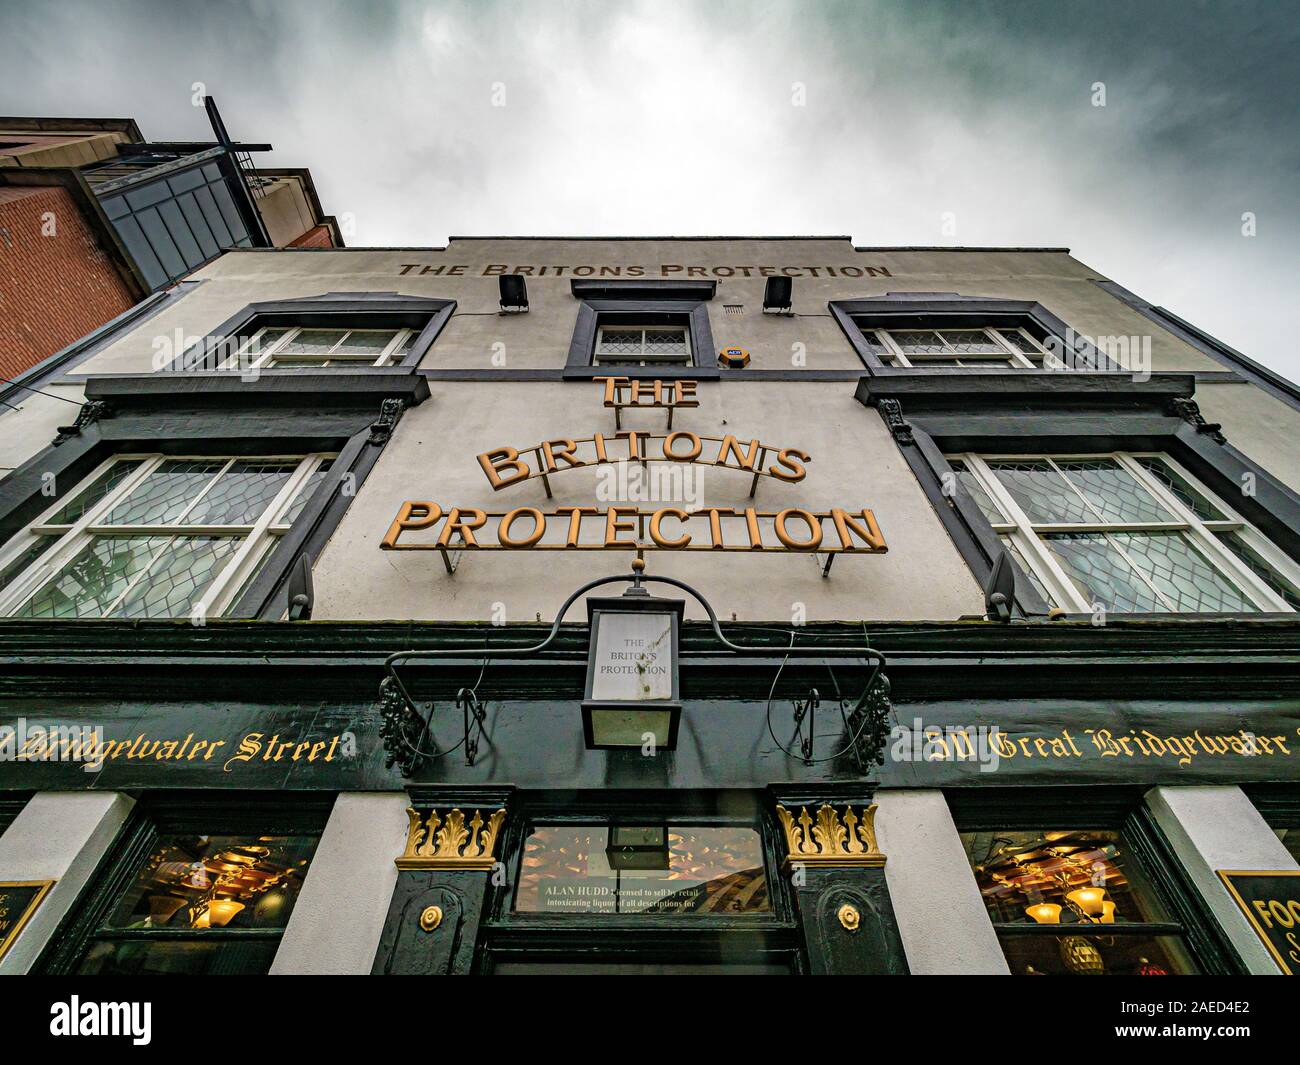 The Briton's Protection pub on the corner of Great Bridgewater Street and Lower Moseley Street, manchester, UK.  Built in 1806. Stock Photo